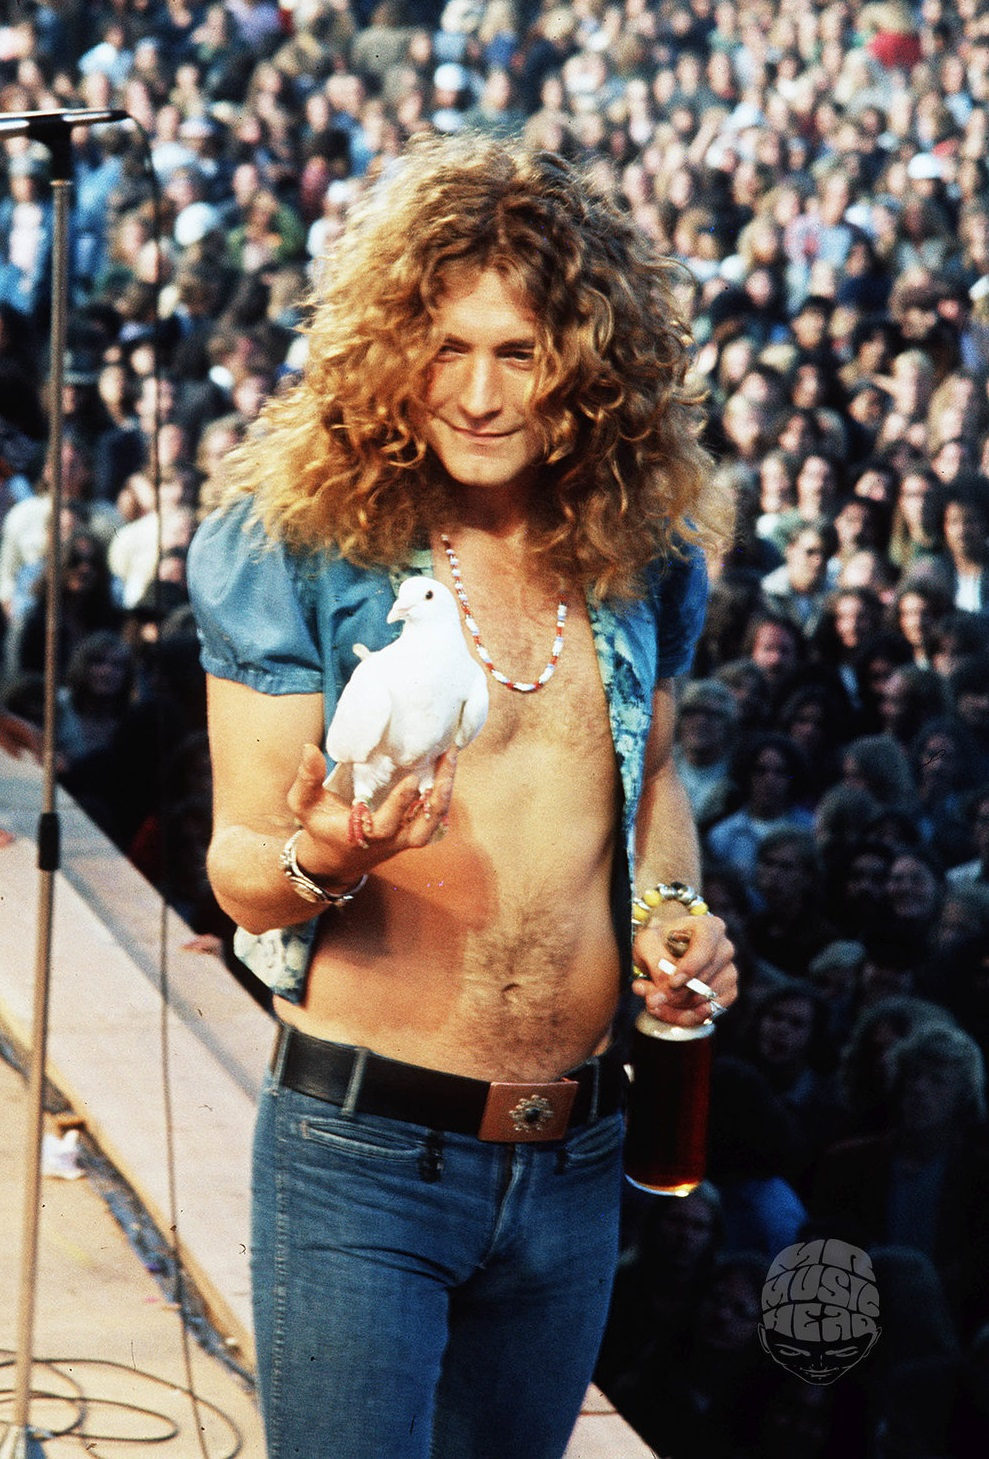 Robert Plant holding dove onstage 1970s